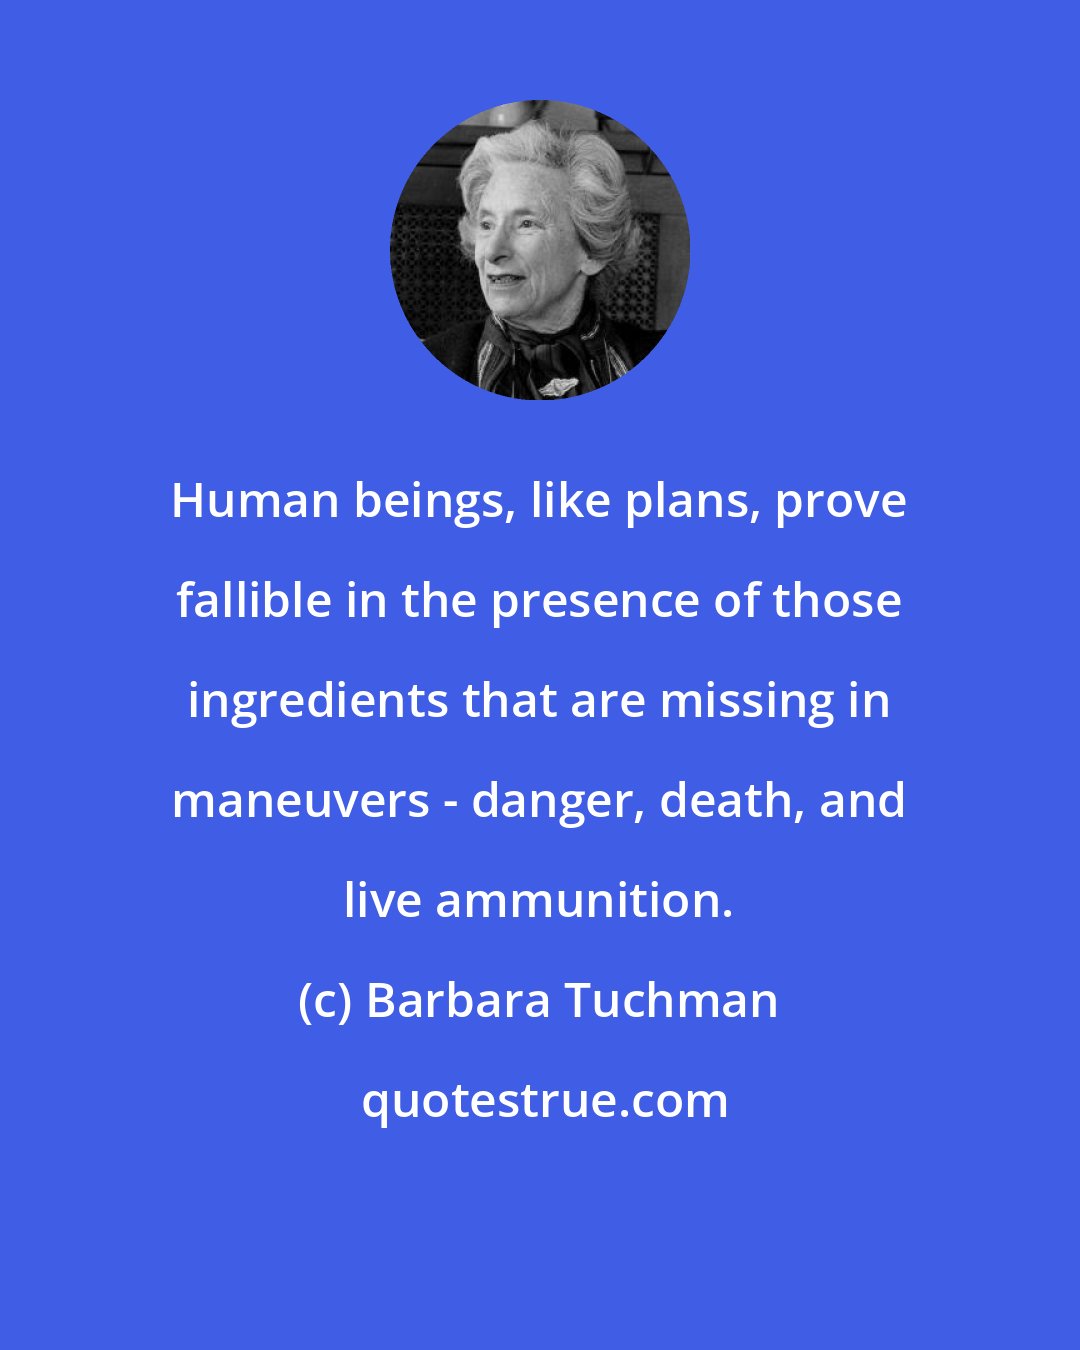 Barbara Tuchman: Human beings, like plans, prove fallible in the presence of those ingredients that are missing in maneuvers - danger, death, and live ammunition.